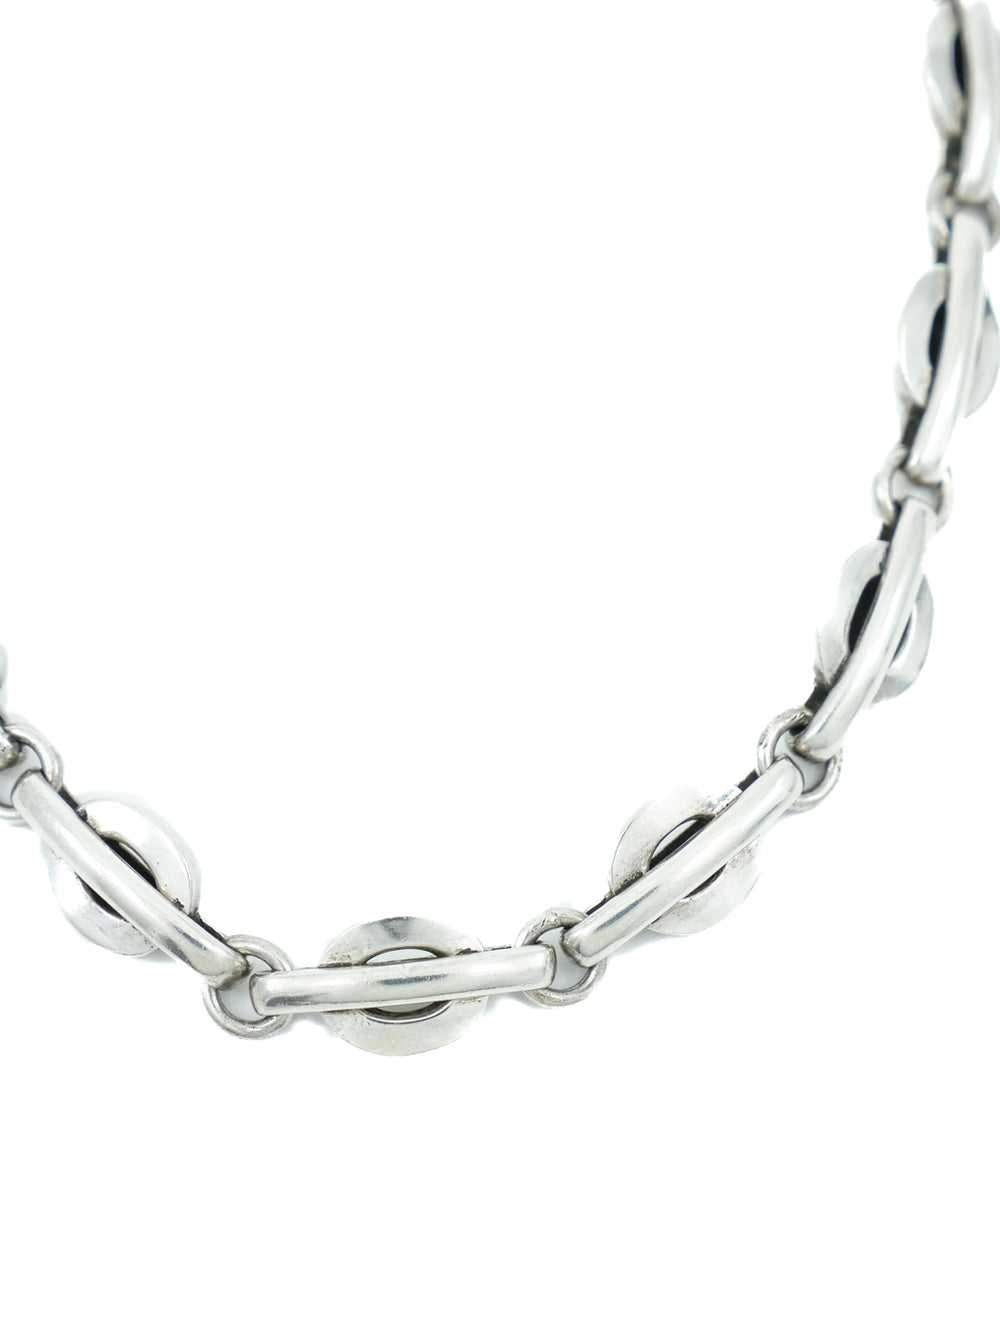 Mexican Sterling Oval and Bar Link Necklace - image 2